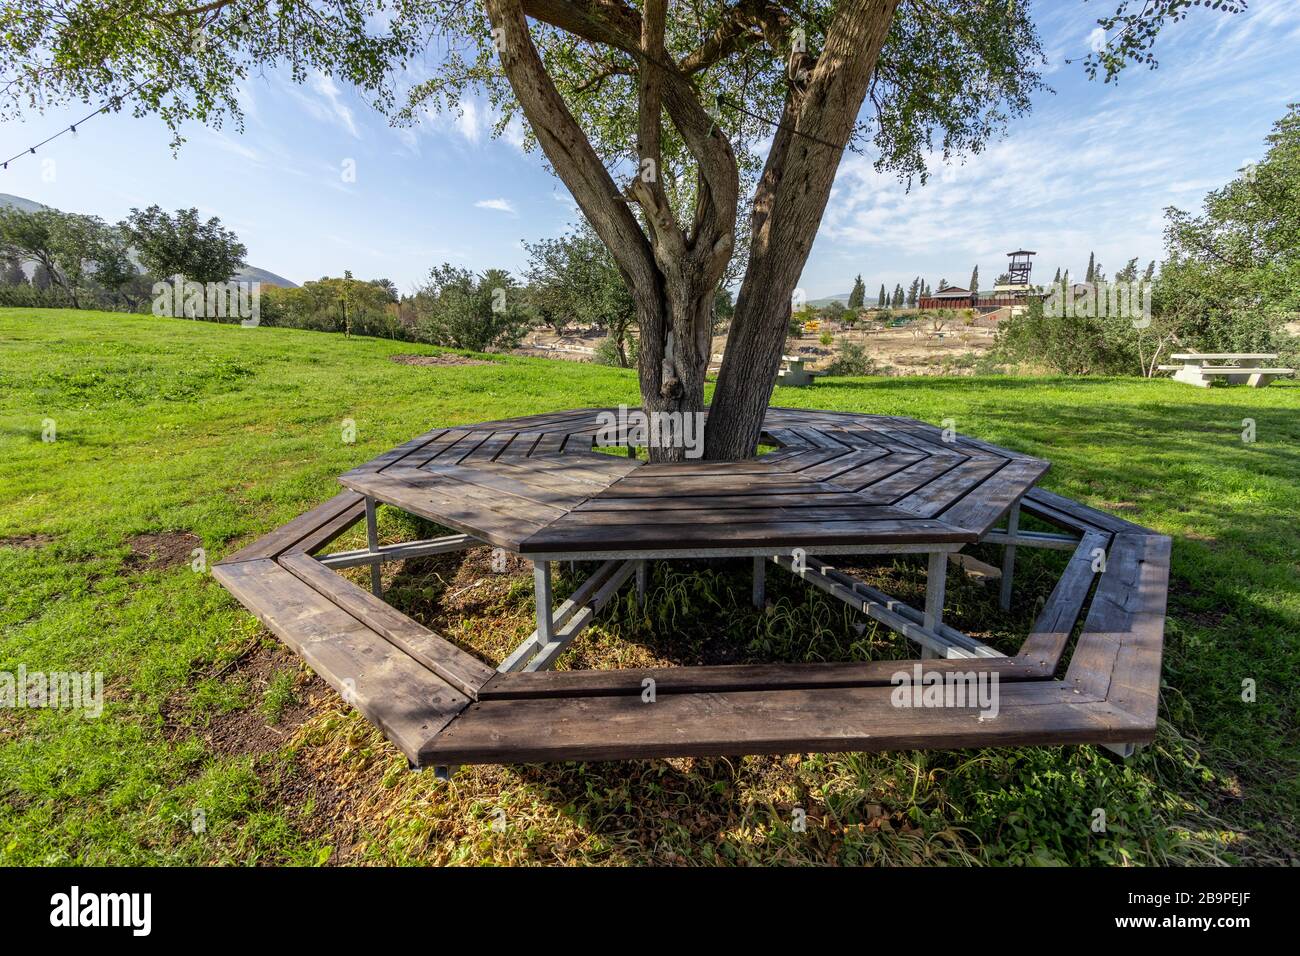 A hexagonal bench and table made of wood around an olive tree surrounded by  green grass Stock Photo - Alamy